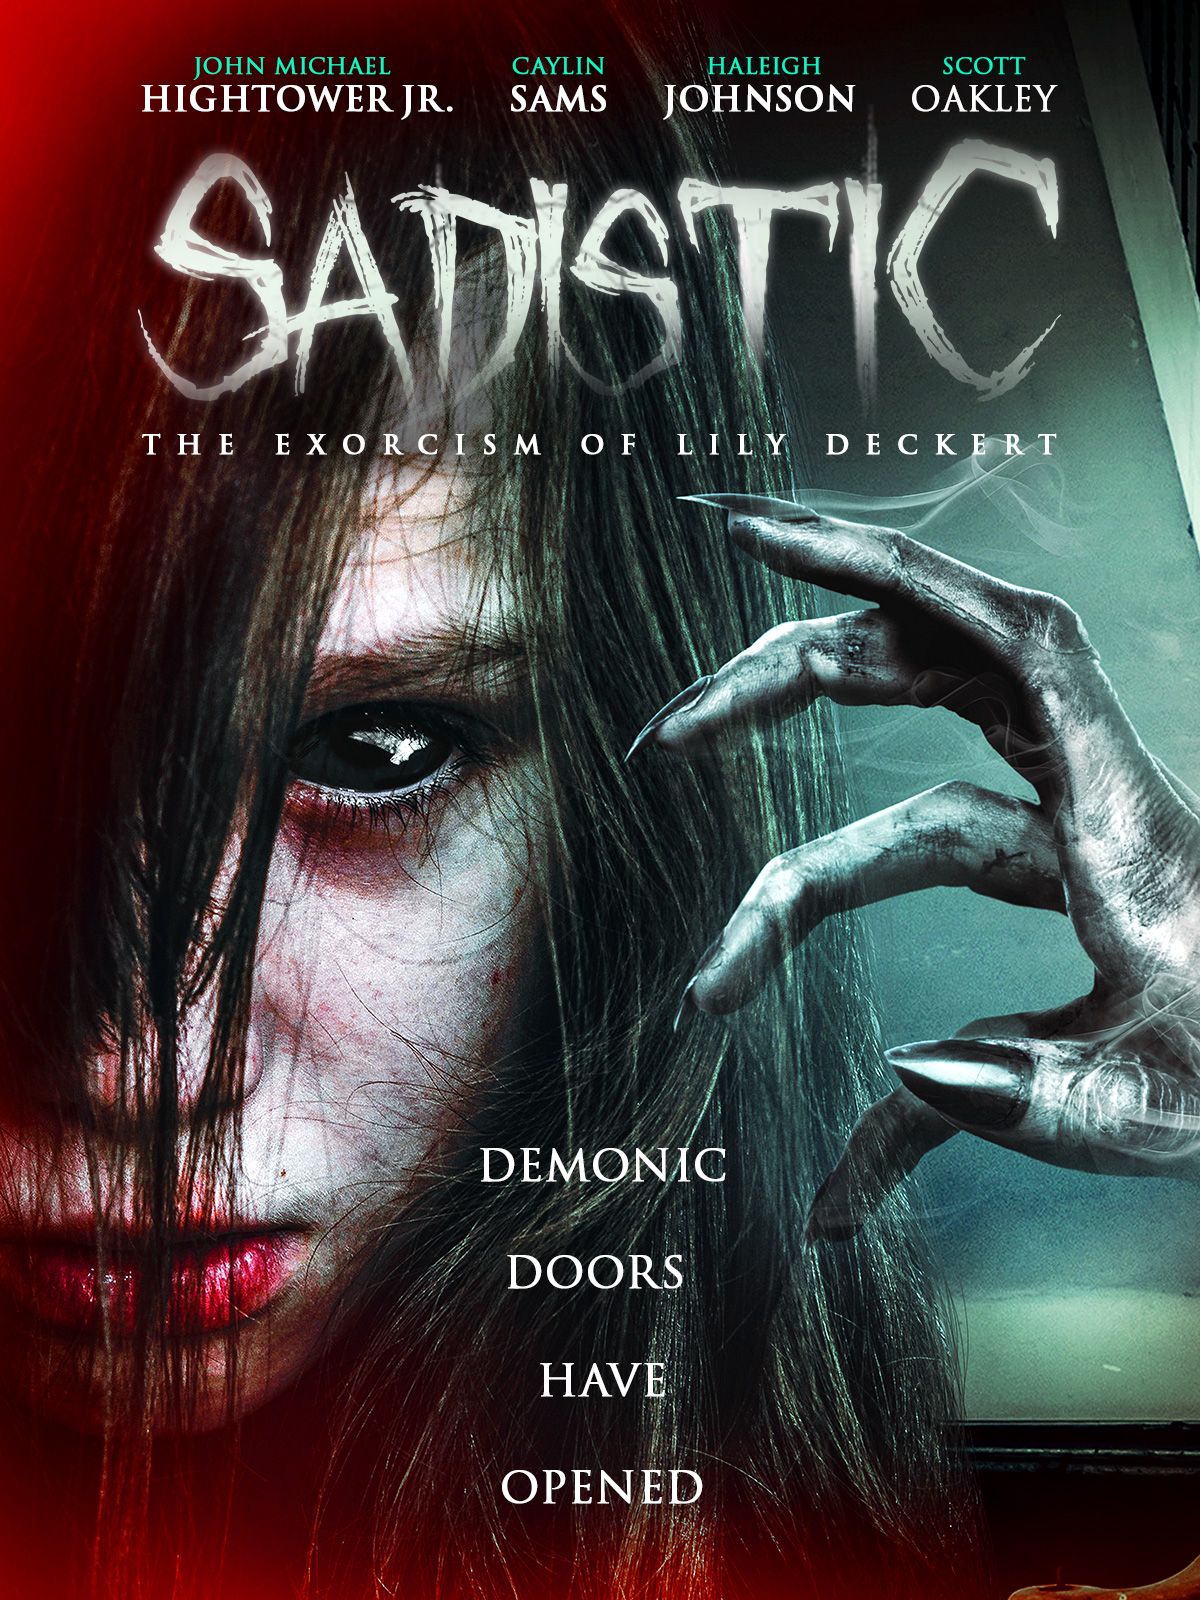 Keyart for the movie Sadistic: The Exorcism of Lily Deckert